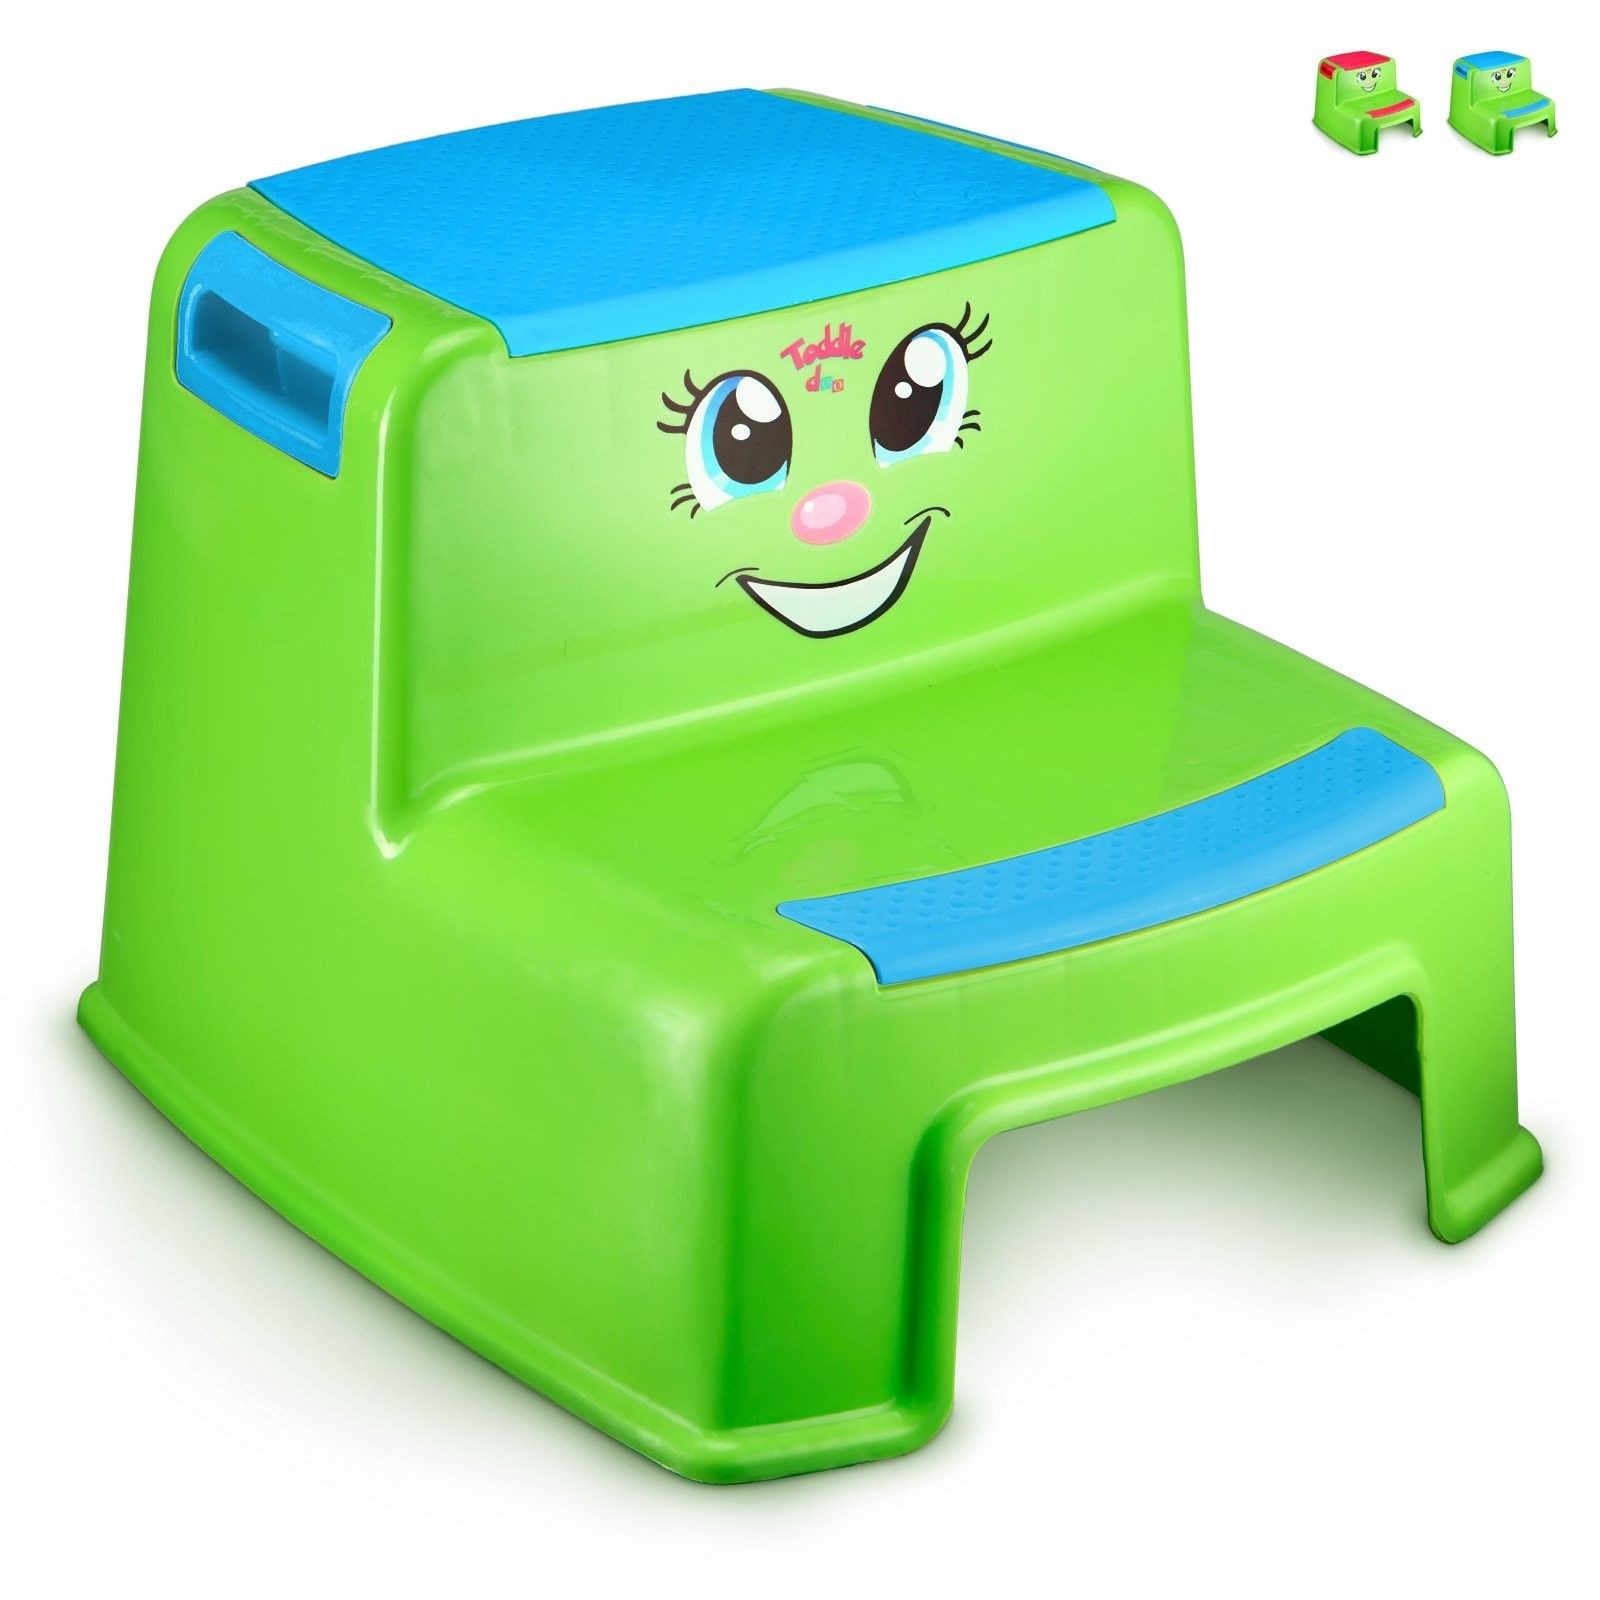 Kids Bathroom Step Stools
 Step Stools for Kids – Toddlers Potty Step Stool for